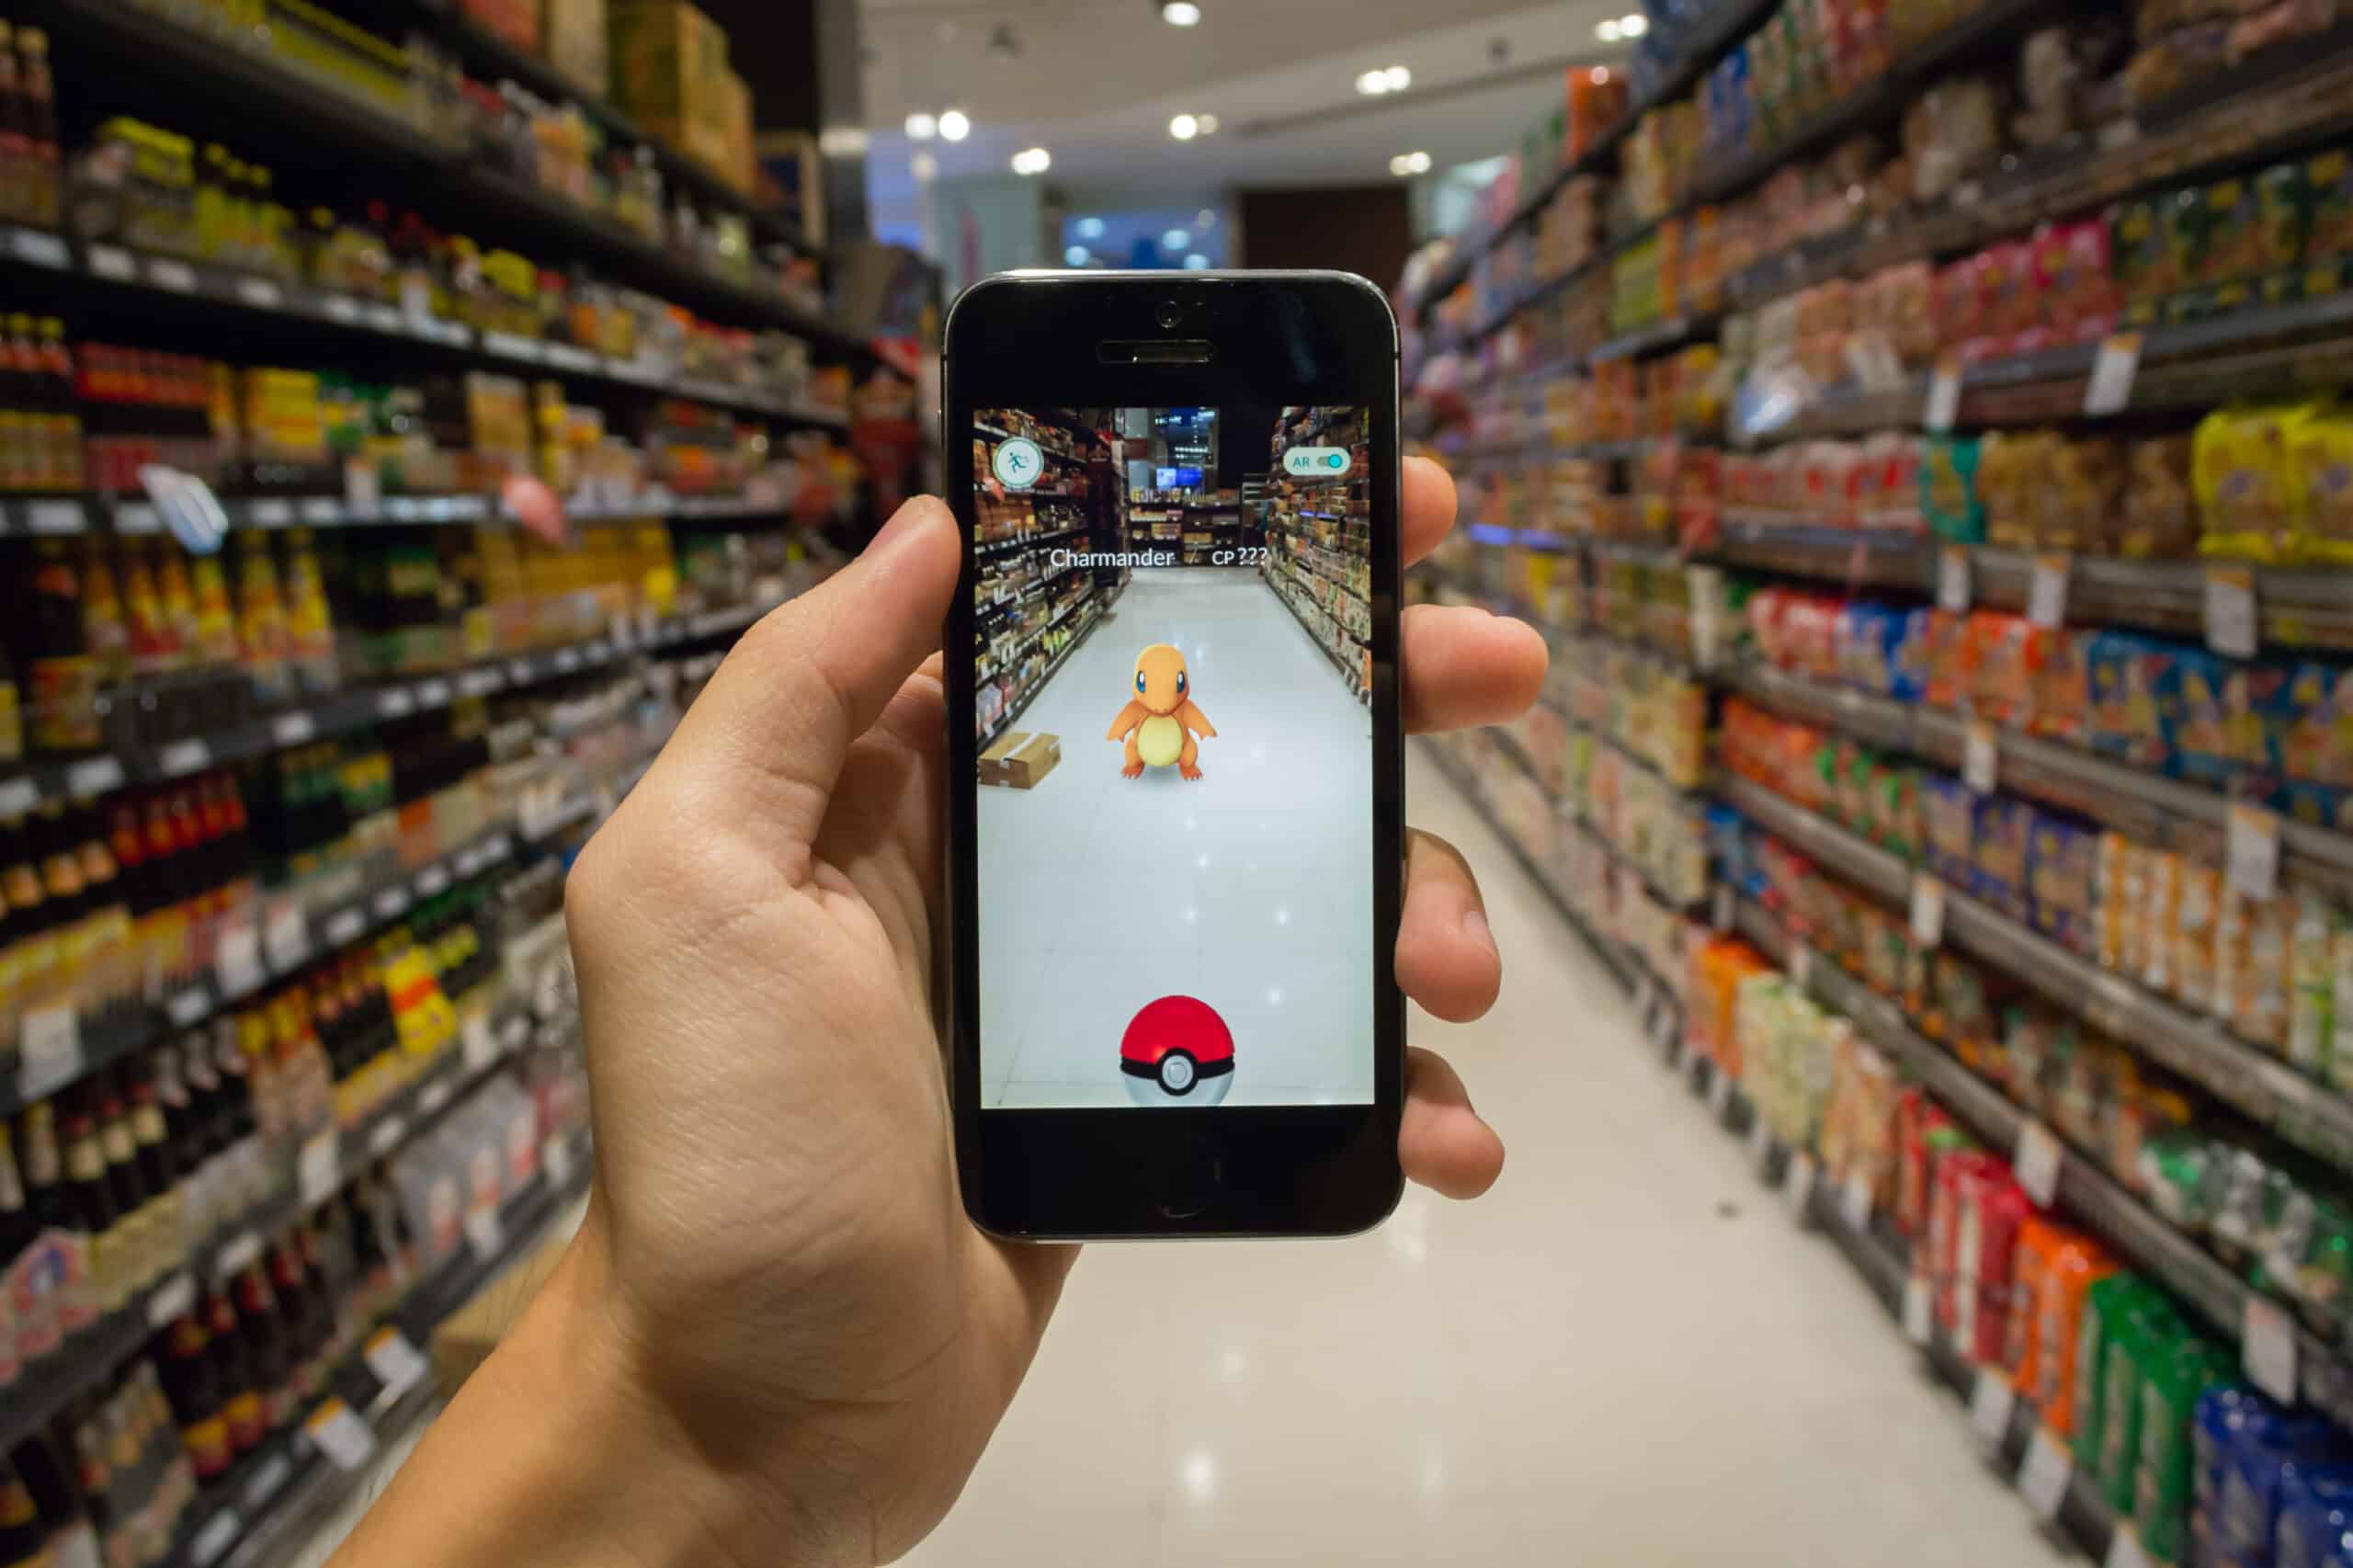 As traditional forms of advertising start to lose their power over consumers, brands are increasingly turning to innovative approaches like gamification.